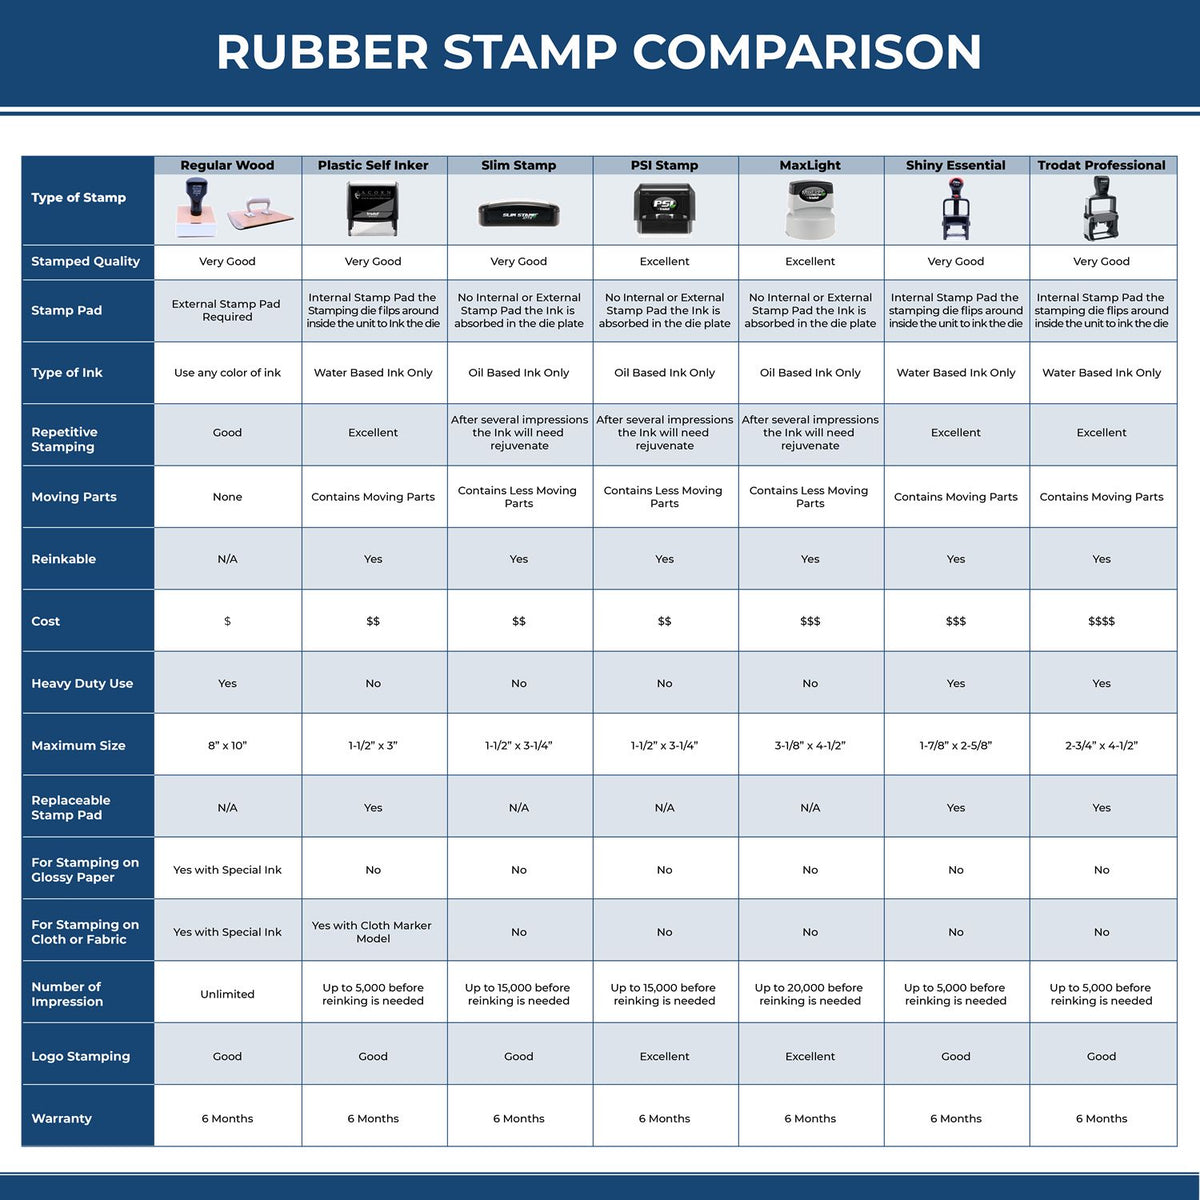 A comparison chart for the different types of mount models available for the Louisiana Professional Engineer Seal Stamp.